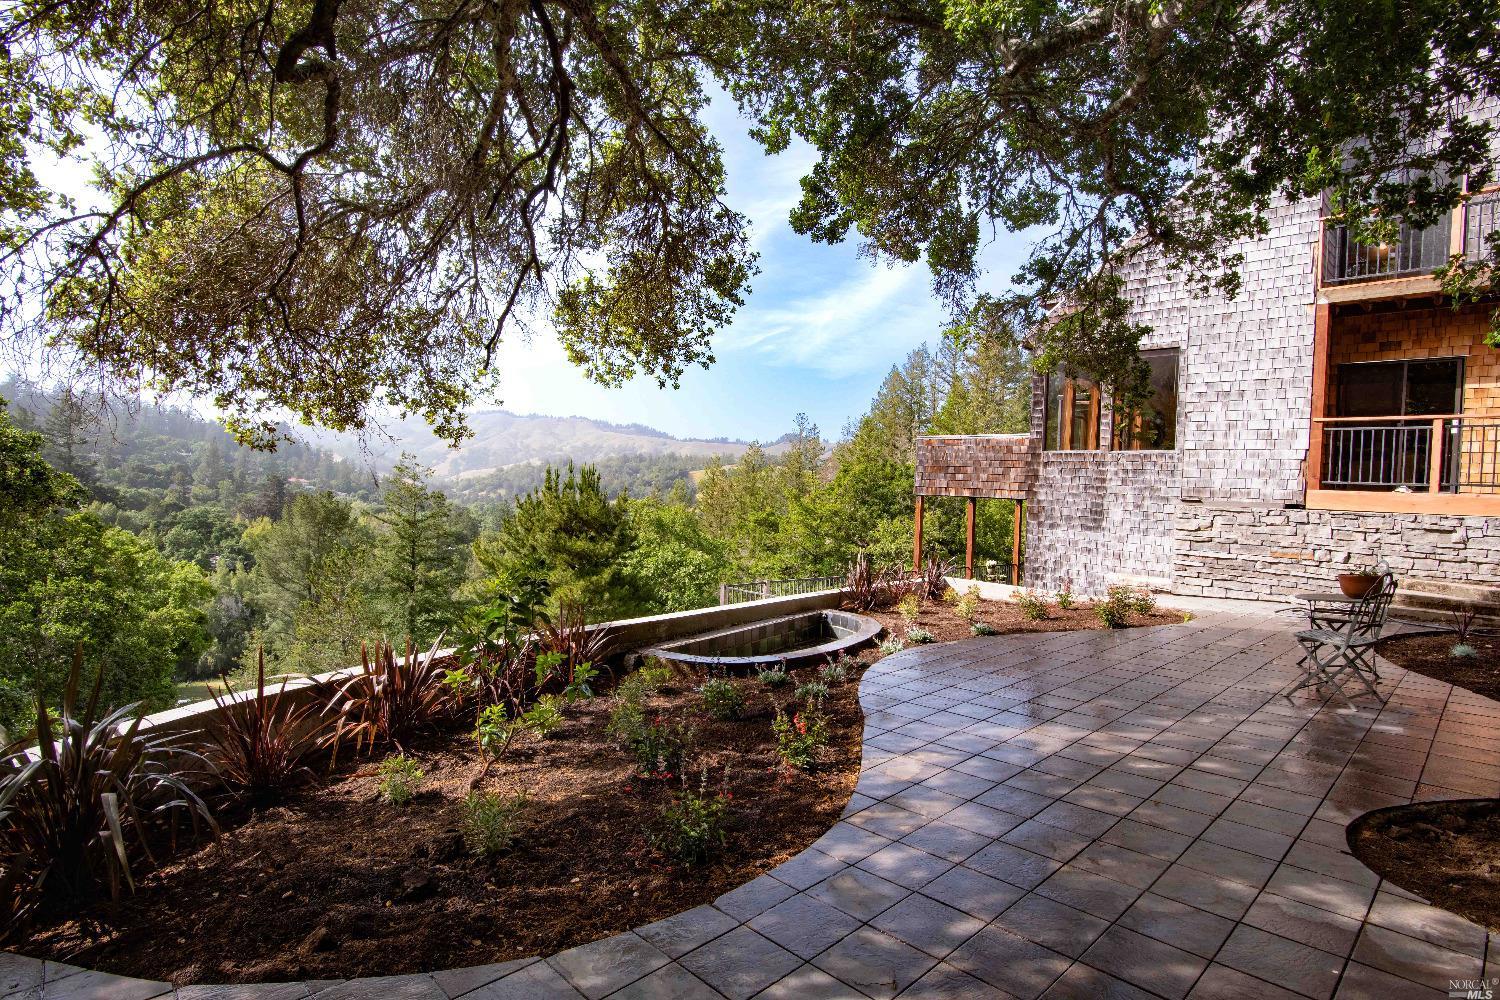 This spacious 3BR/3.5BA retreat sits on a 1 acre lot overlooking the sunny panorama of the San Geronimo valley w/ the Spirit Rock hills on the horizon. You can enjoy this view from the large living room, sunroom & kitchen or from the many decks that offer compelling sunrise & sunset views. The kitchen features useful storage & a walk-in pantry large enough to make Costco proud. The top floor has 1 BR & full bath & a recreation room currently used for playing pool. The bottom floor has 2 huge bedrooms w/ excellent valley views & 2 large full baths. This home offers a 3018 sq ft canvas waiting for you to embellish & improve it w/ your own choice of updated finishes. It was well-built in 1981 by a contractor for his own family. To the left of the home is a well designed sunny patio w/ garden beds & a small fishpond. To the right is a carport for 2 cars & a detached 25X29 ft concrete floor workshop which could accommodate a multitude of uses. The front of the property has a semi circular drive parallel to the road that offers easy parking for an ample number of cars. Nature & wildlife surround this home which is quite private yet close to Marin's best Park, open space preserves, hiking & bike trails, horse stables, Woodacre Market, Fairfax & miles of wild beaches. A rare opportunity!